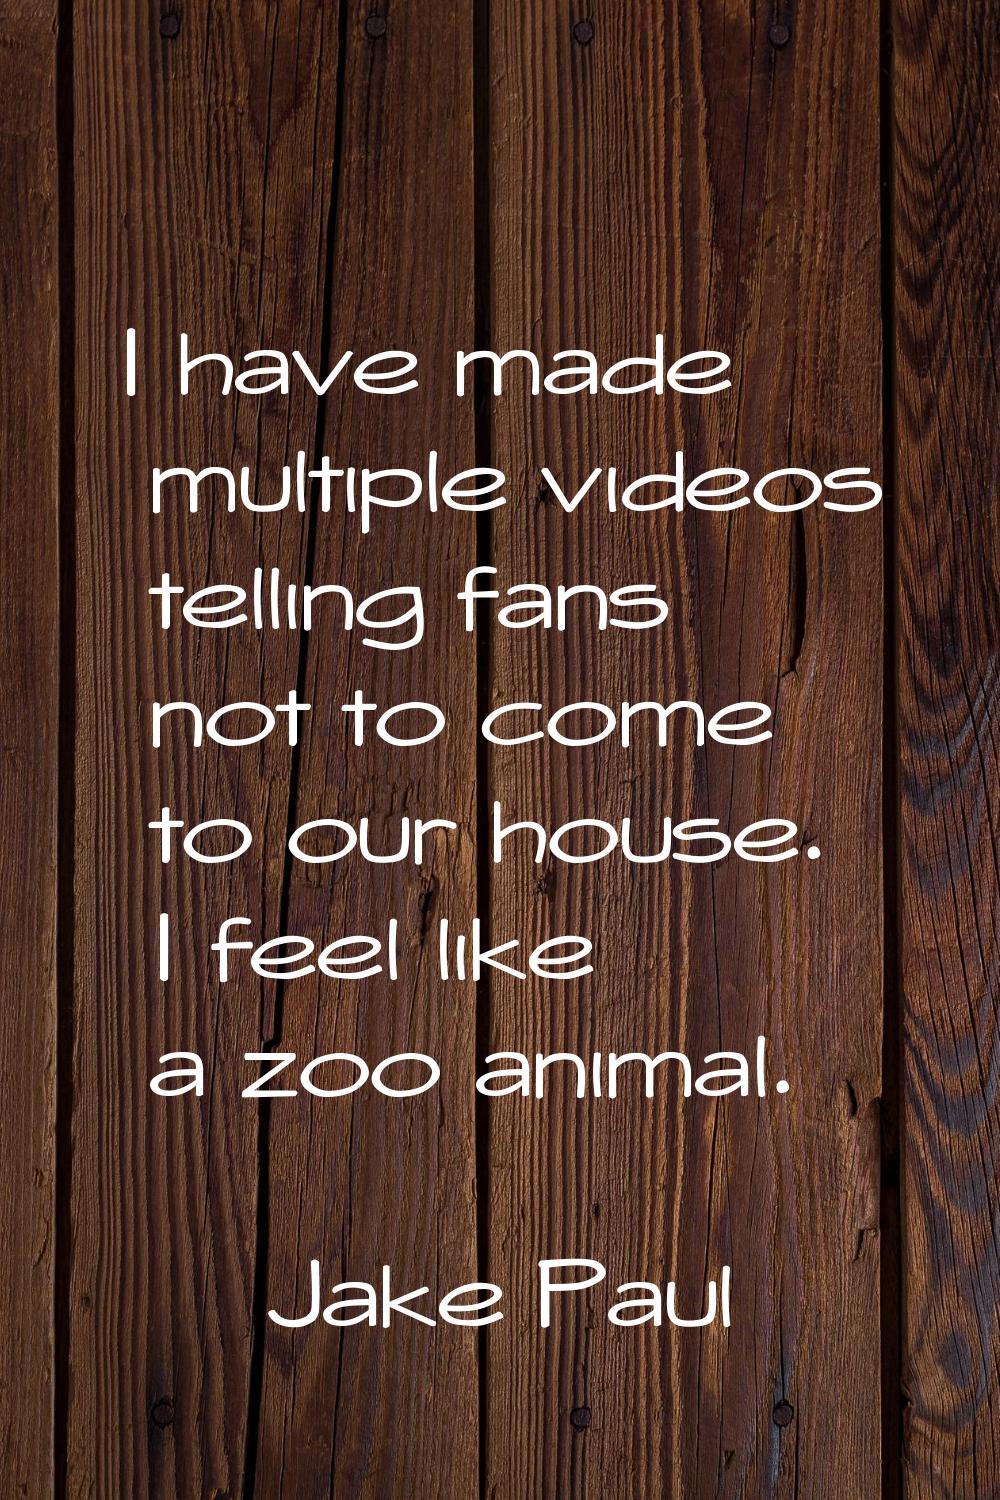 I have made multiple videos telling fans not to come to our house. I feel like a zoo animal.